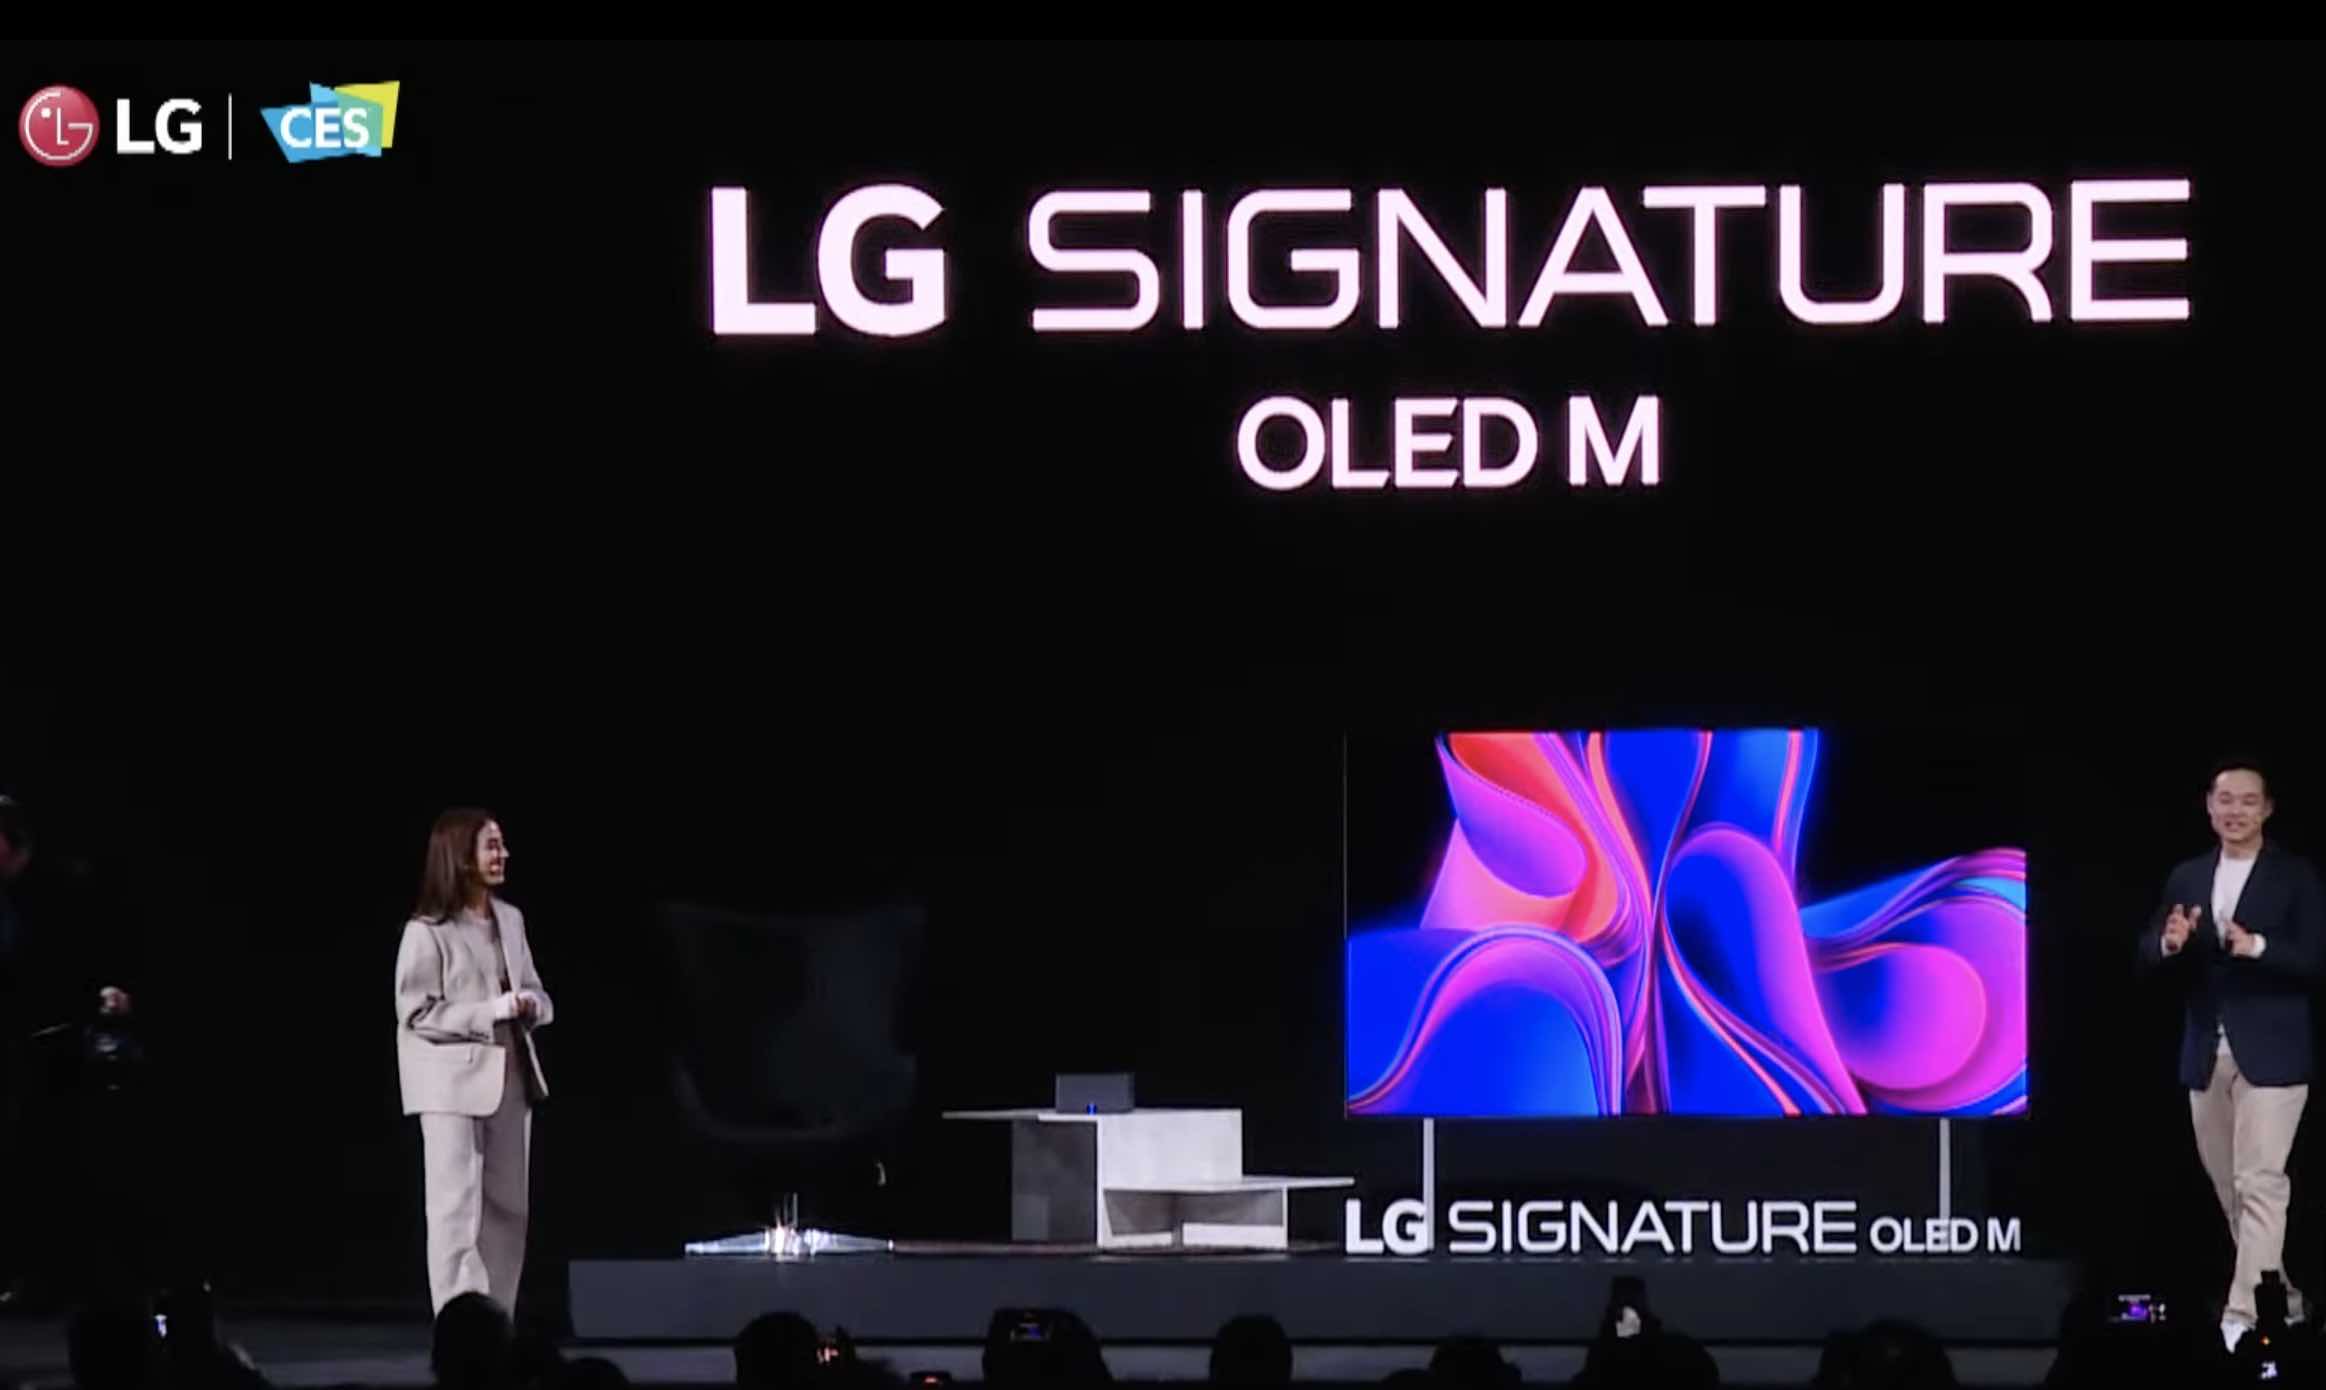 What was announced at CES 2023 LG